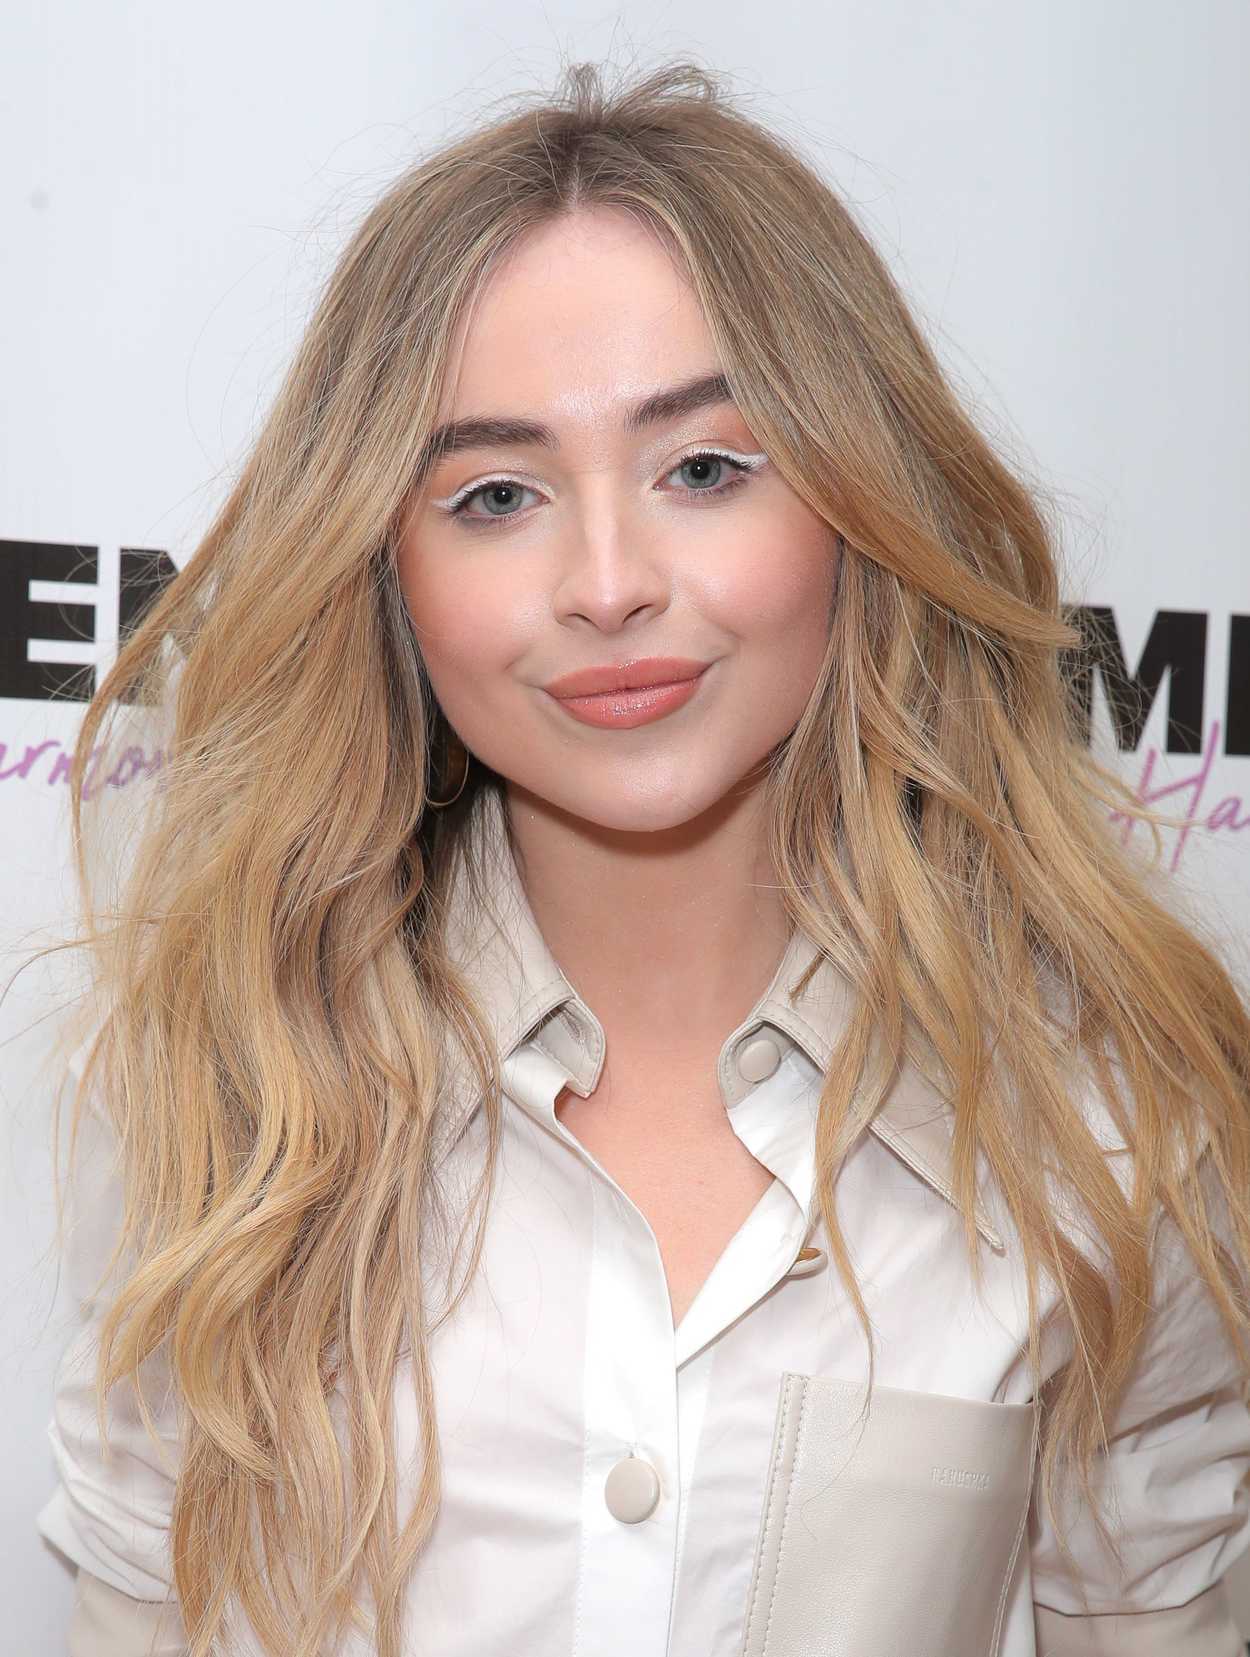 Sabrina Carpenter Attends Women in Harmony Brunch in Los Angeles 02/07 ...